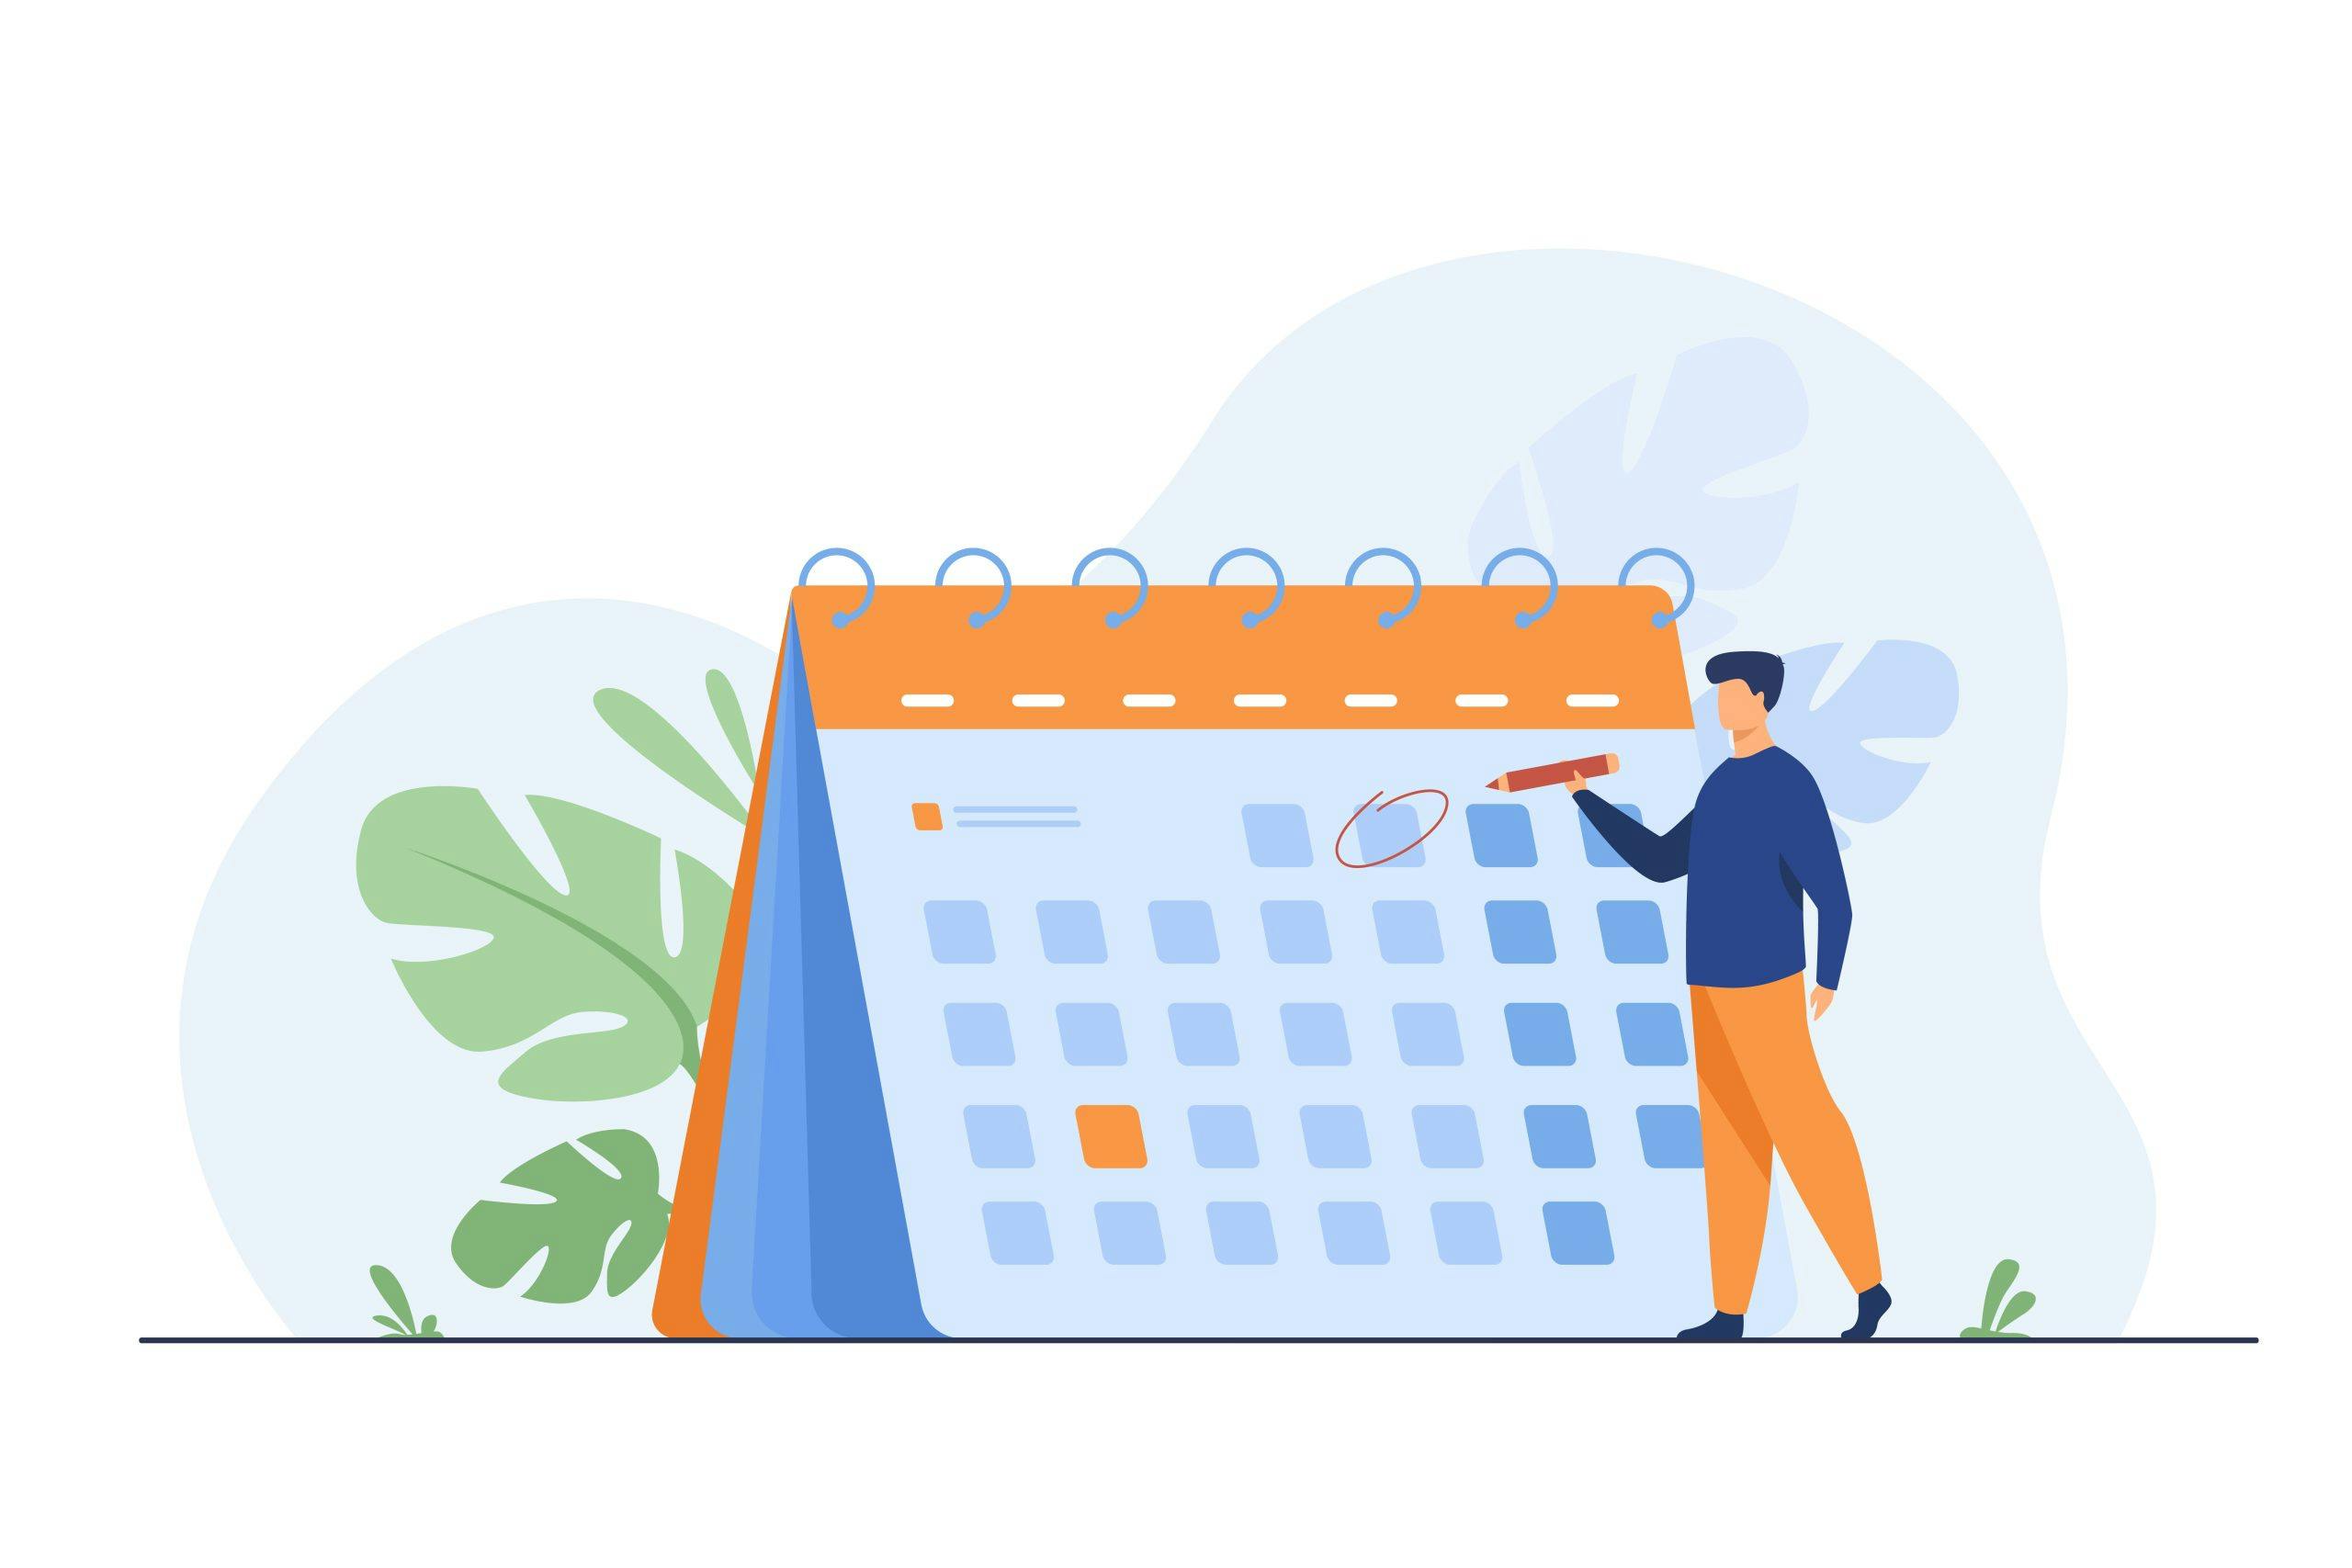 Connecting calendars